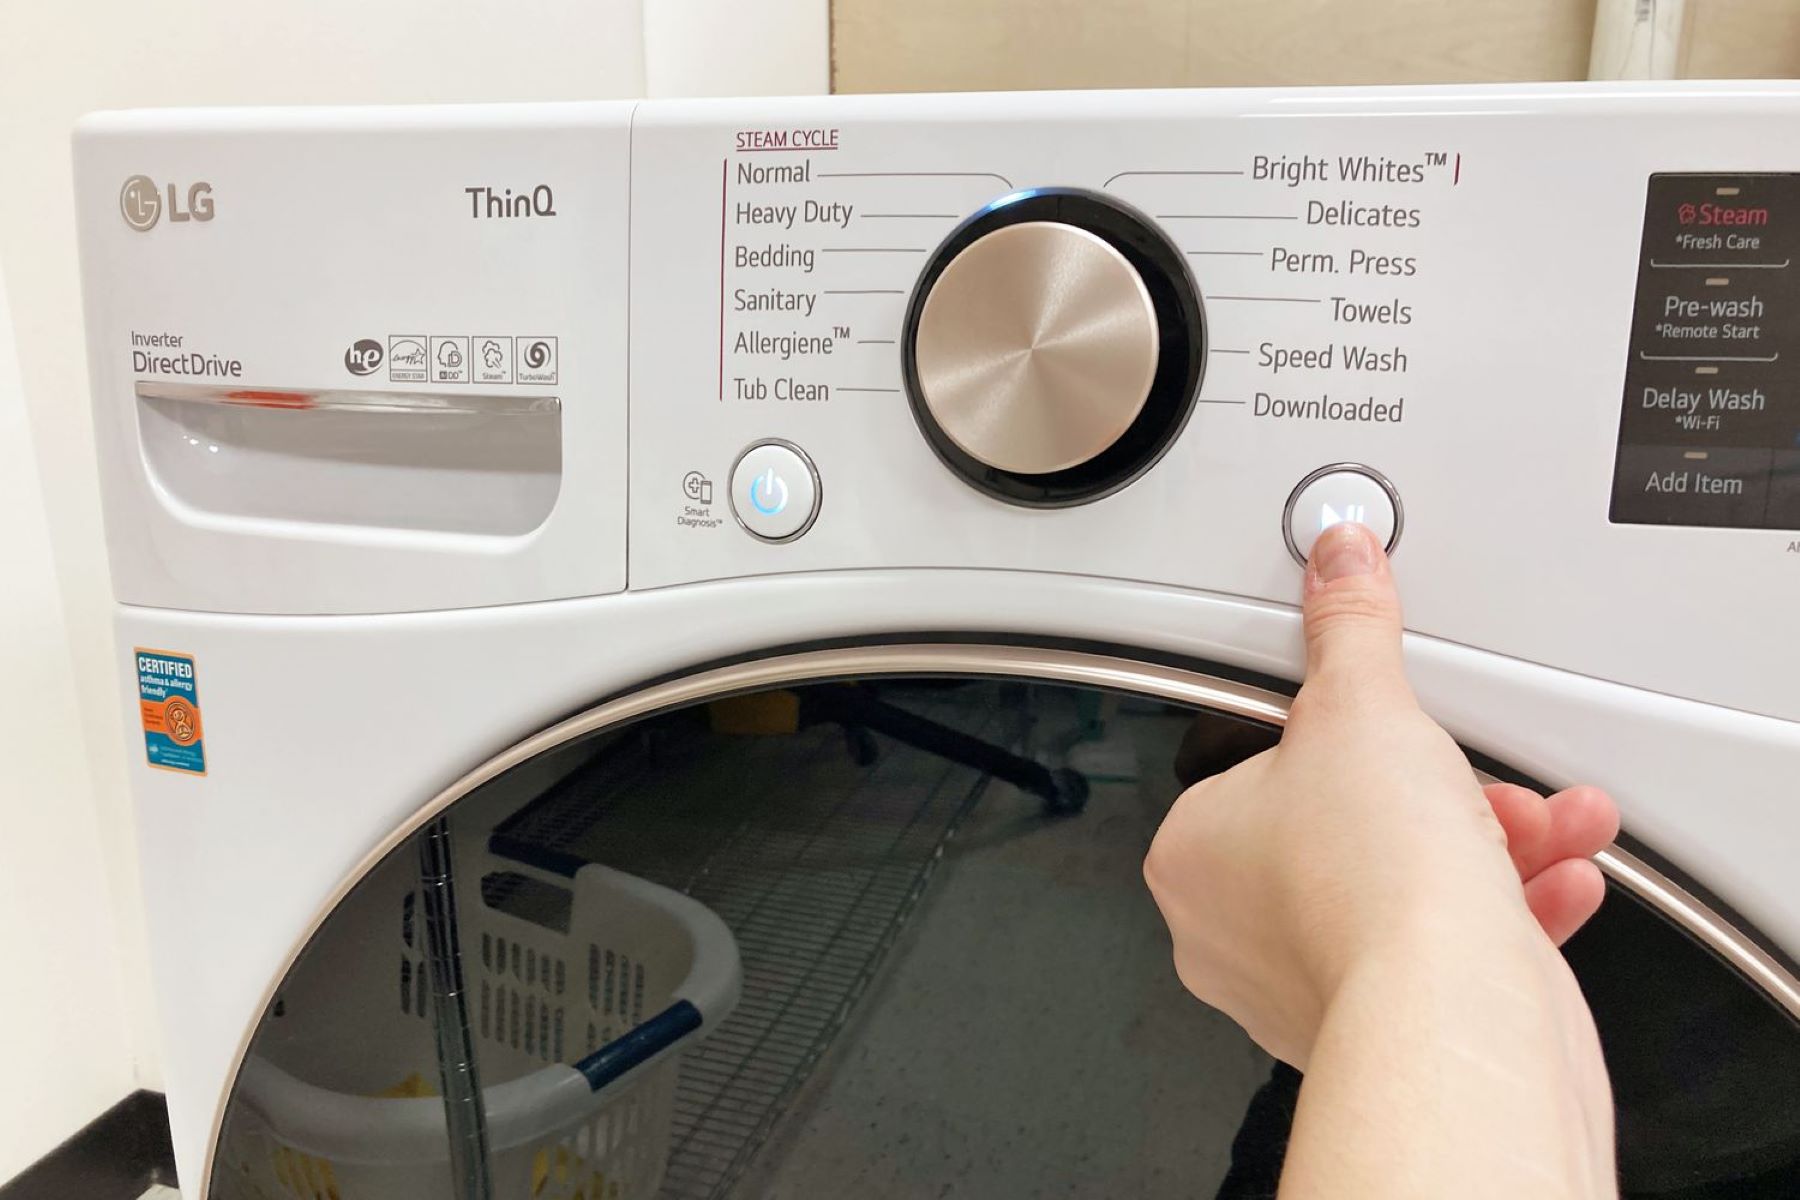 How To Wash A Comforter In An LG Washing Machine